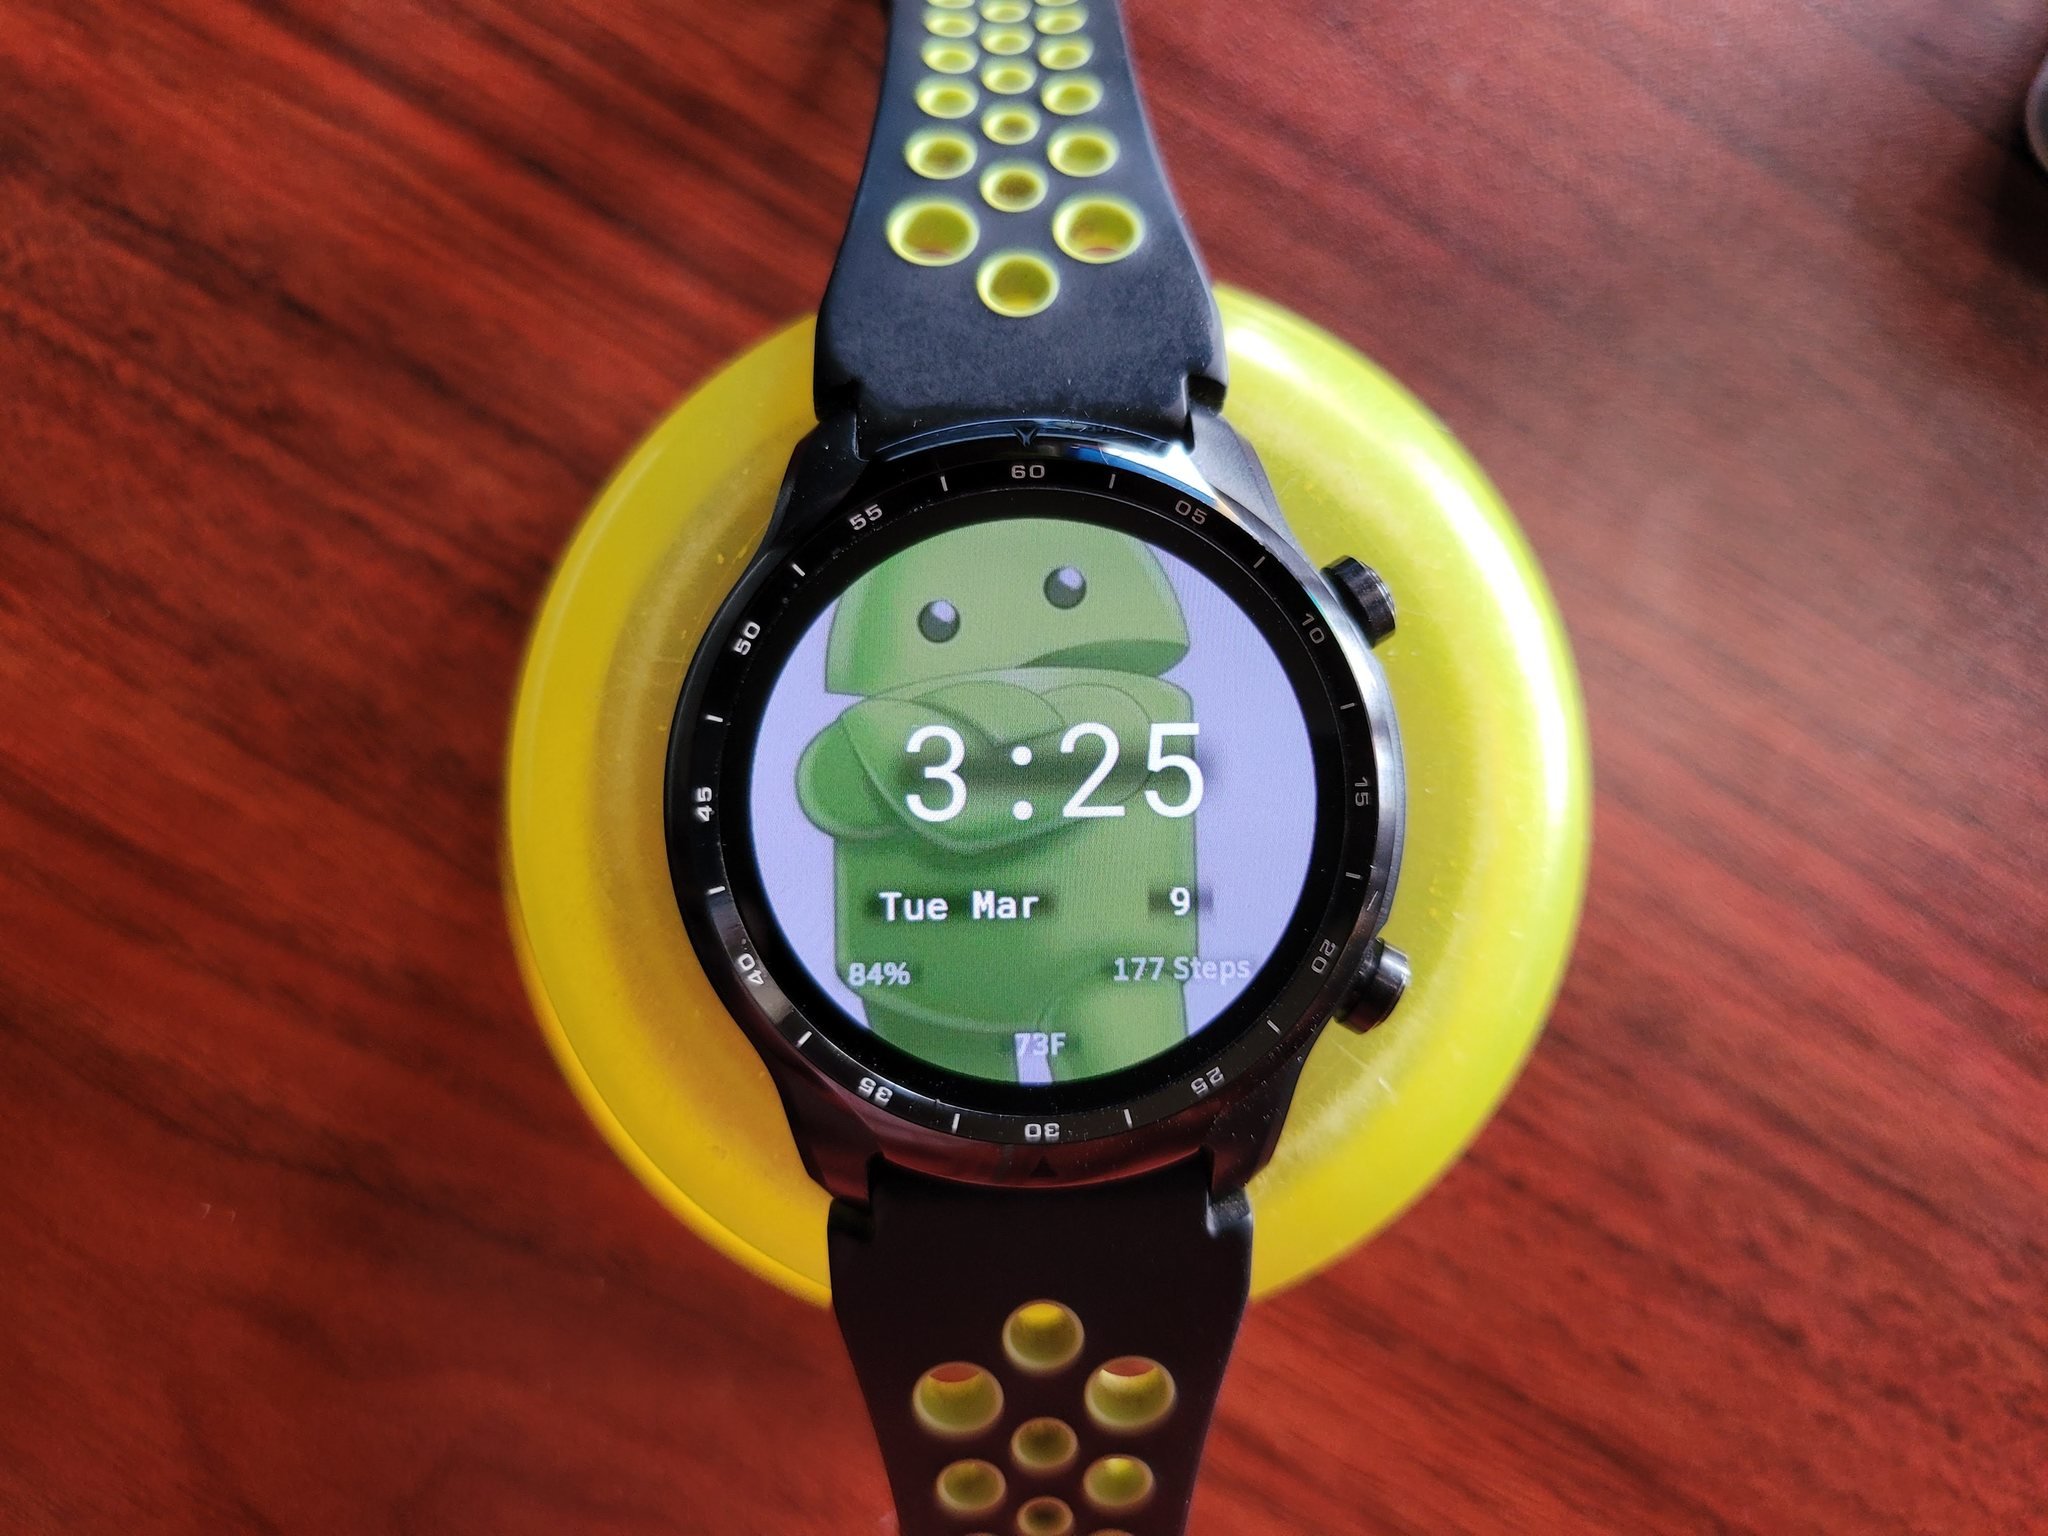 Build watch faces  Android Developers